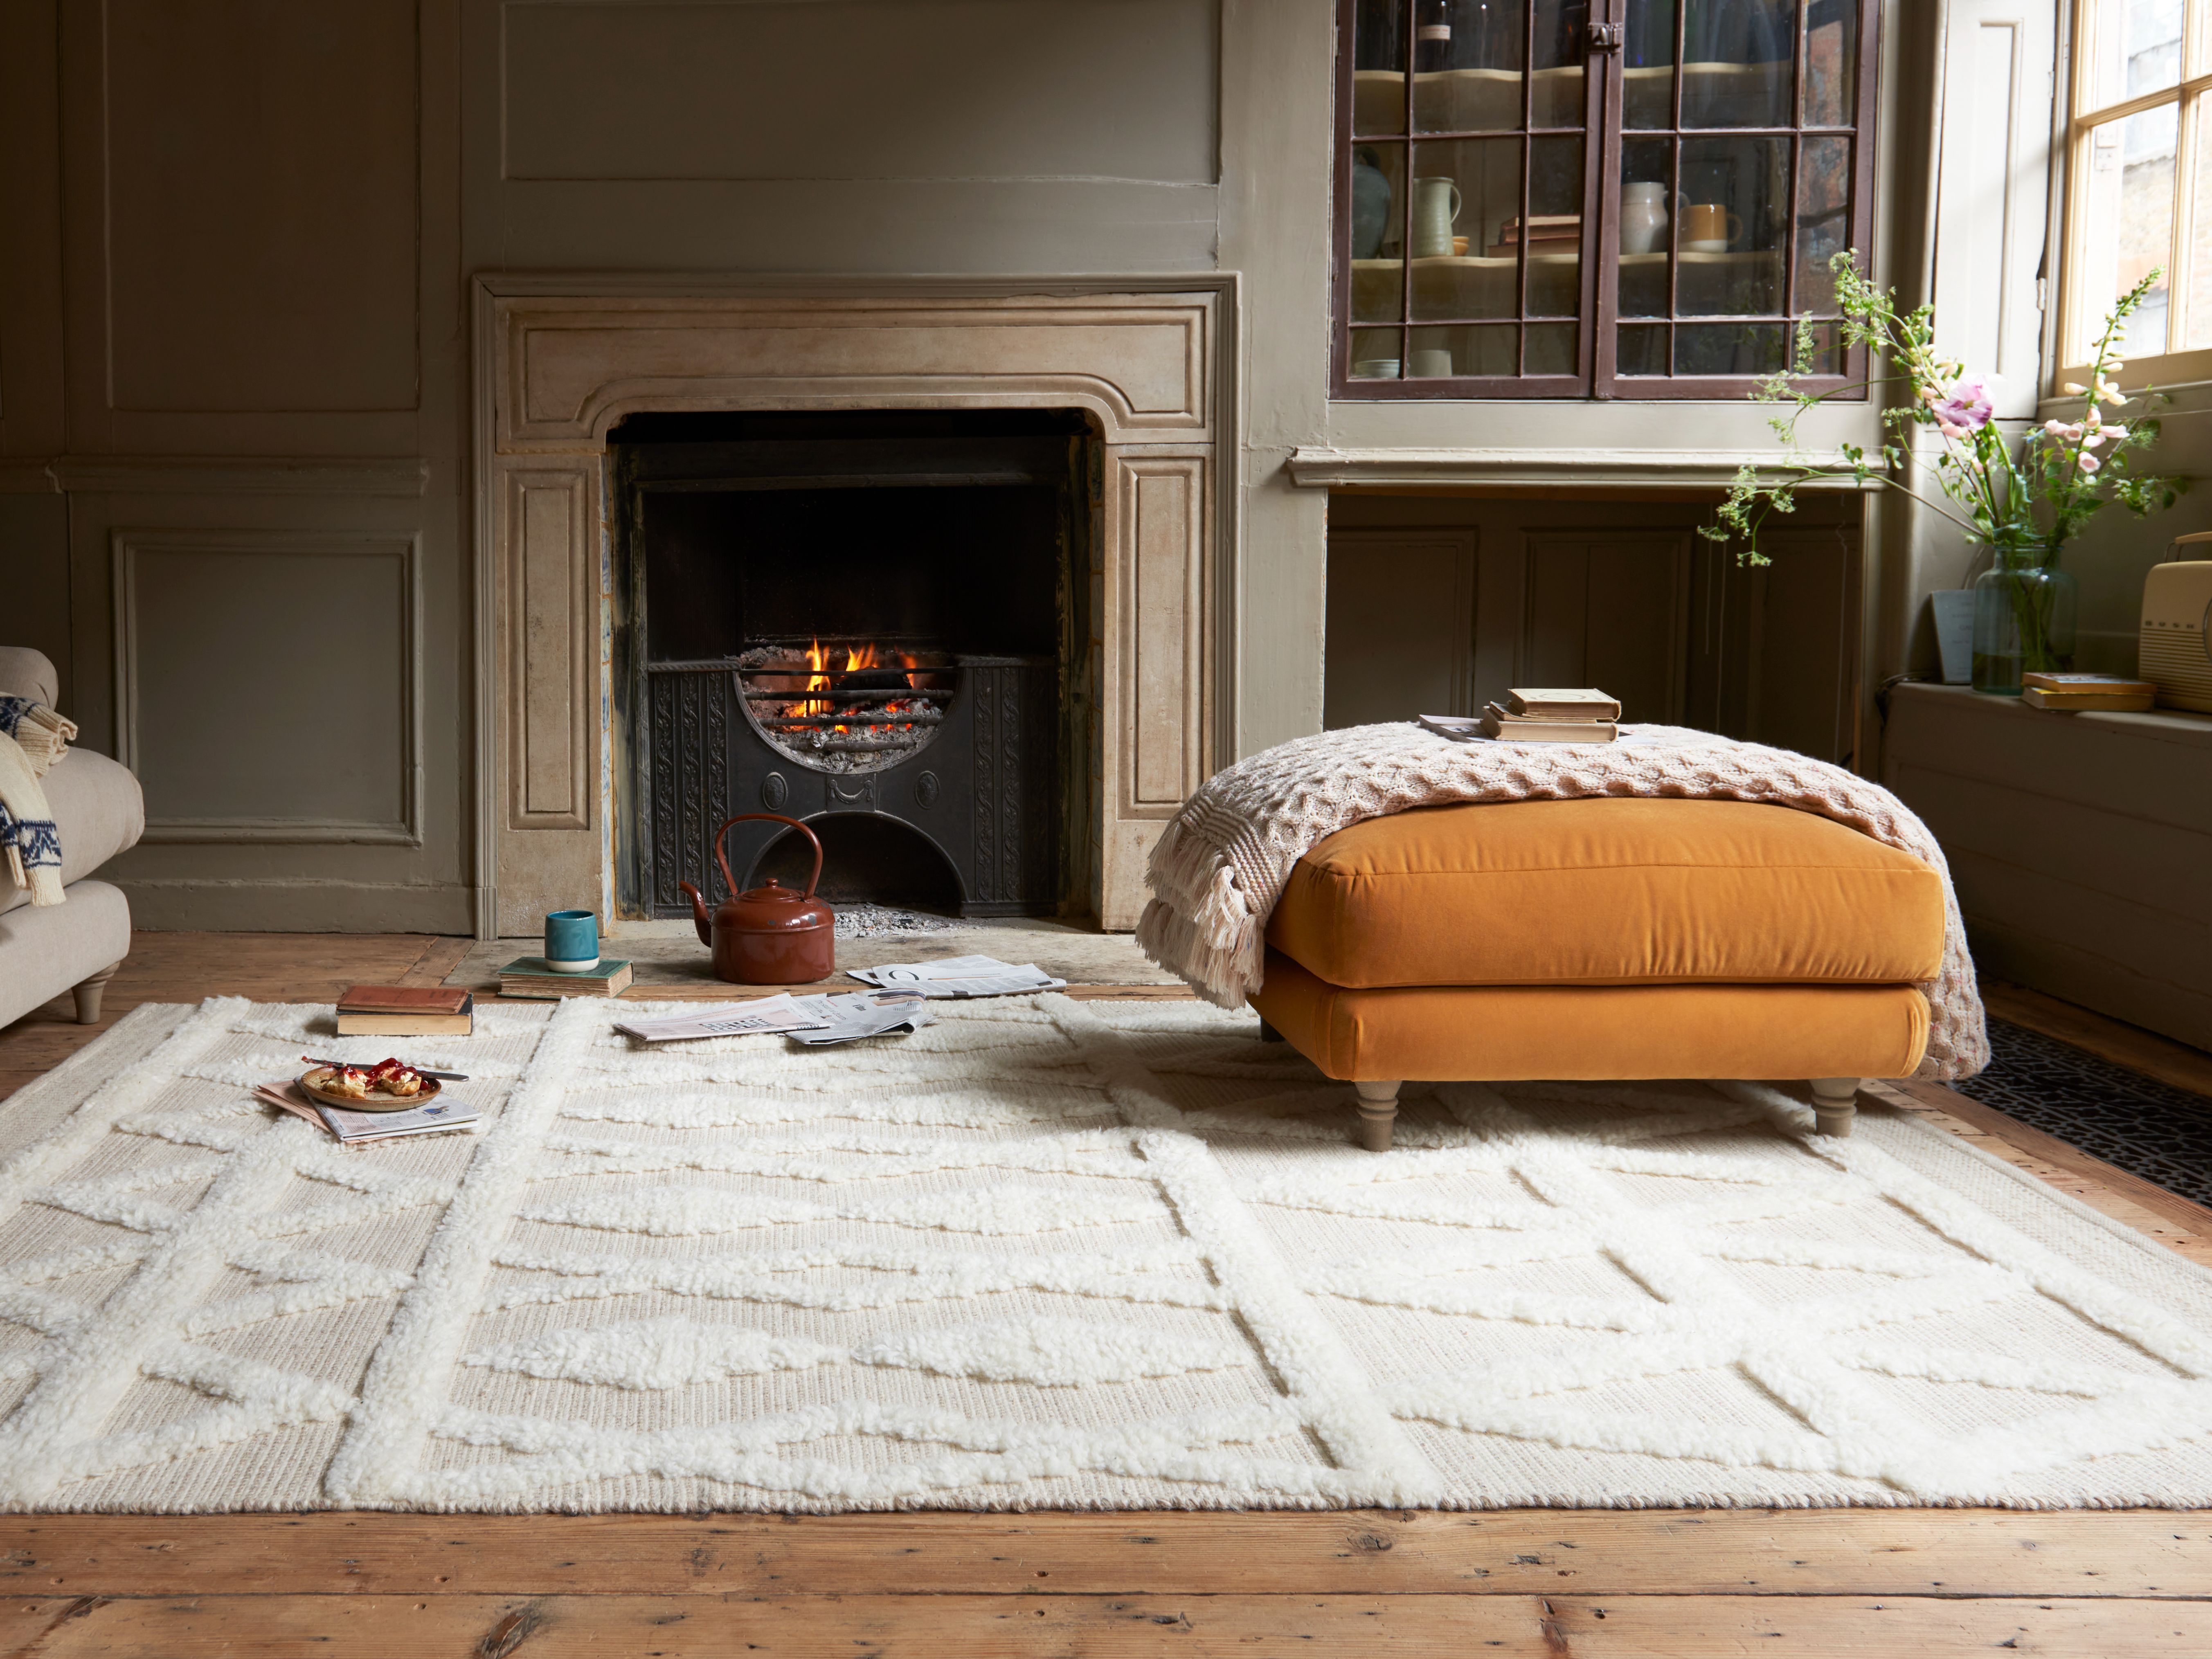 How to clean a wool rug: an expert guide